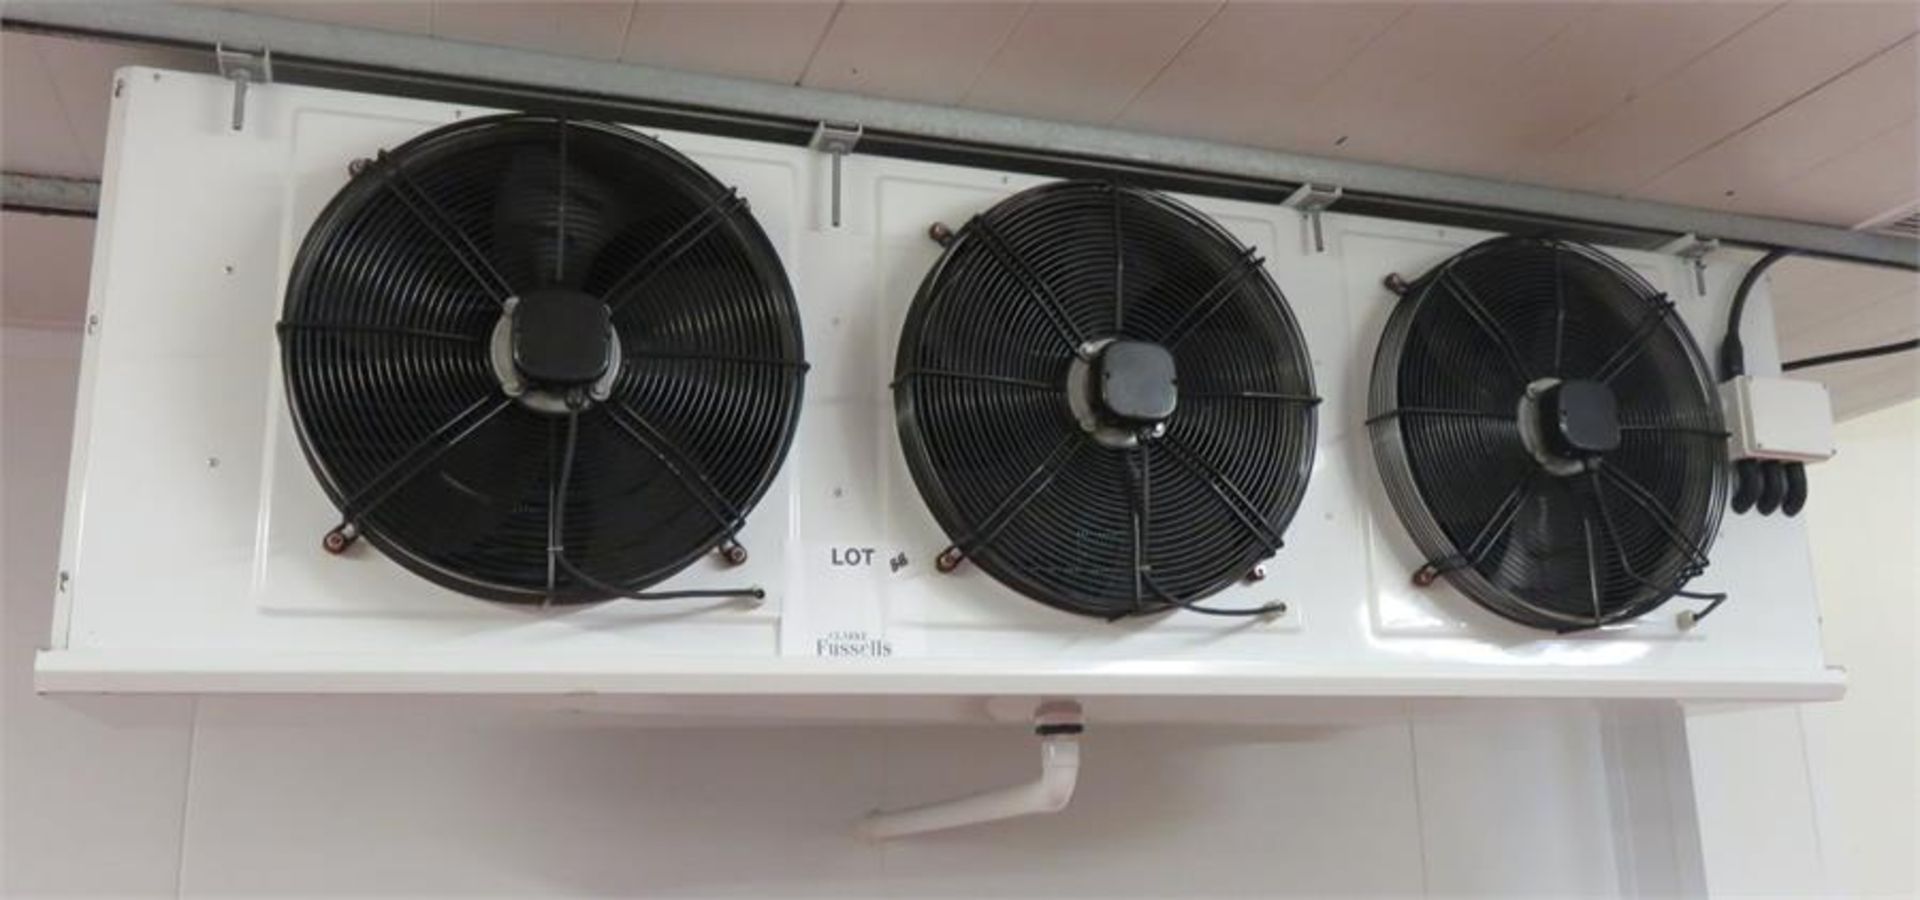 FAN EVAPORATORS AND CONDENSERS - Image 2 of 7